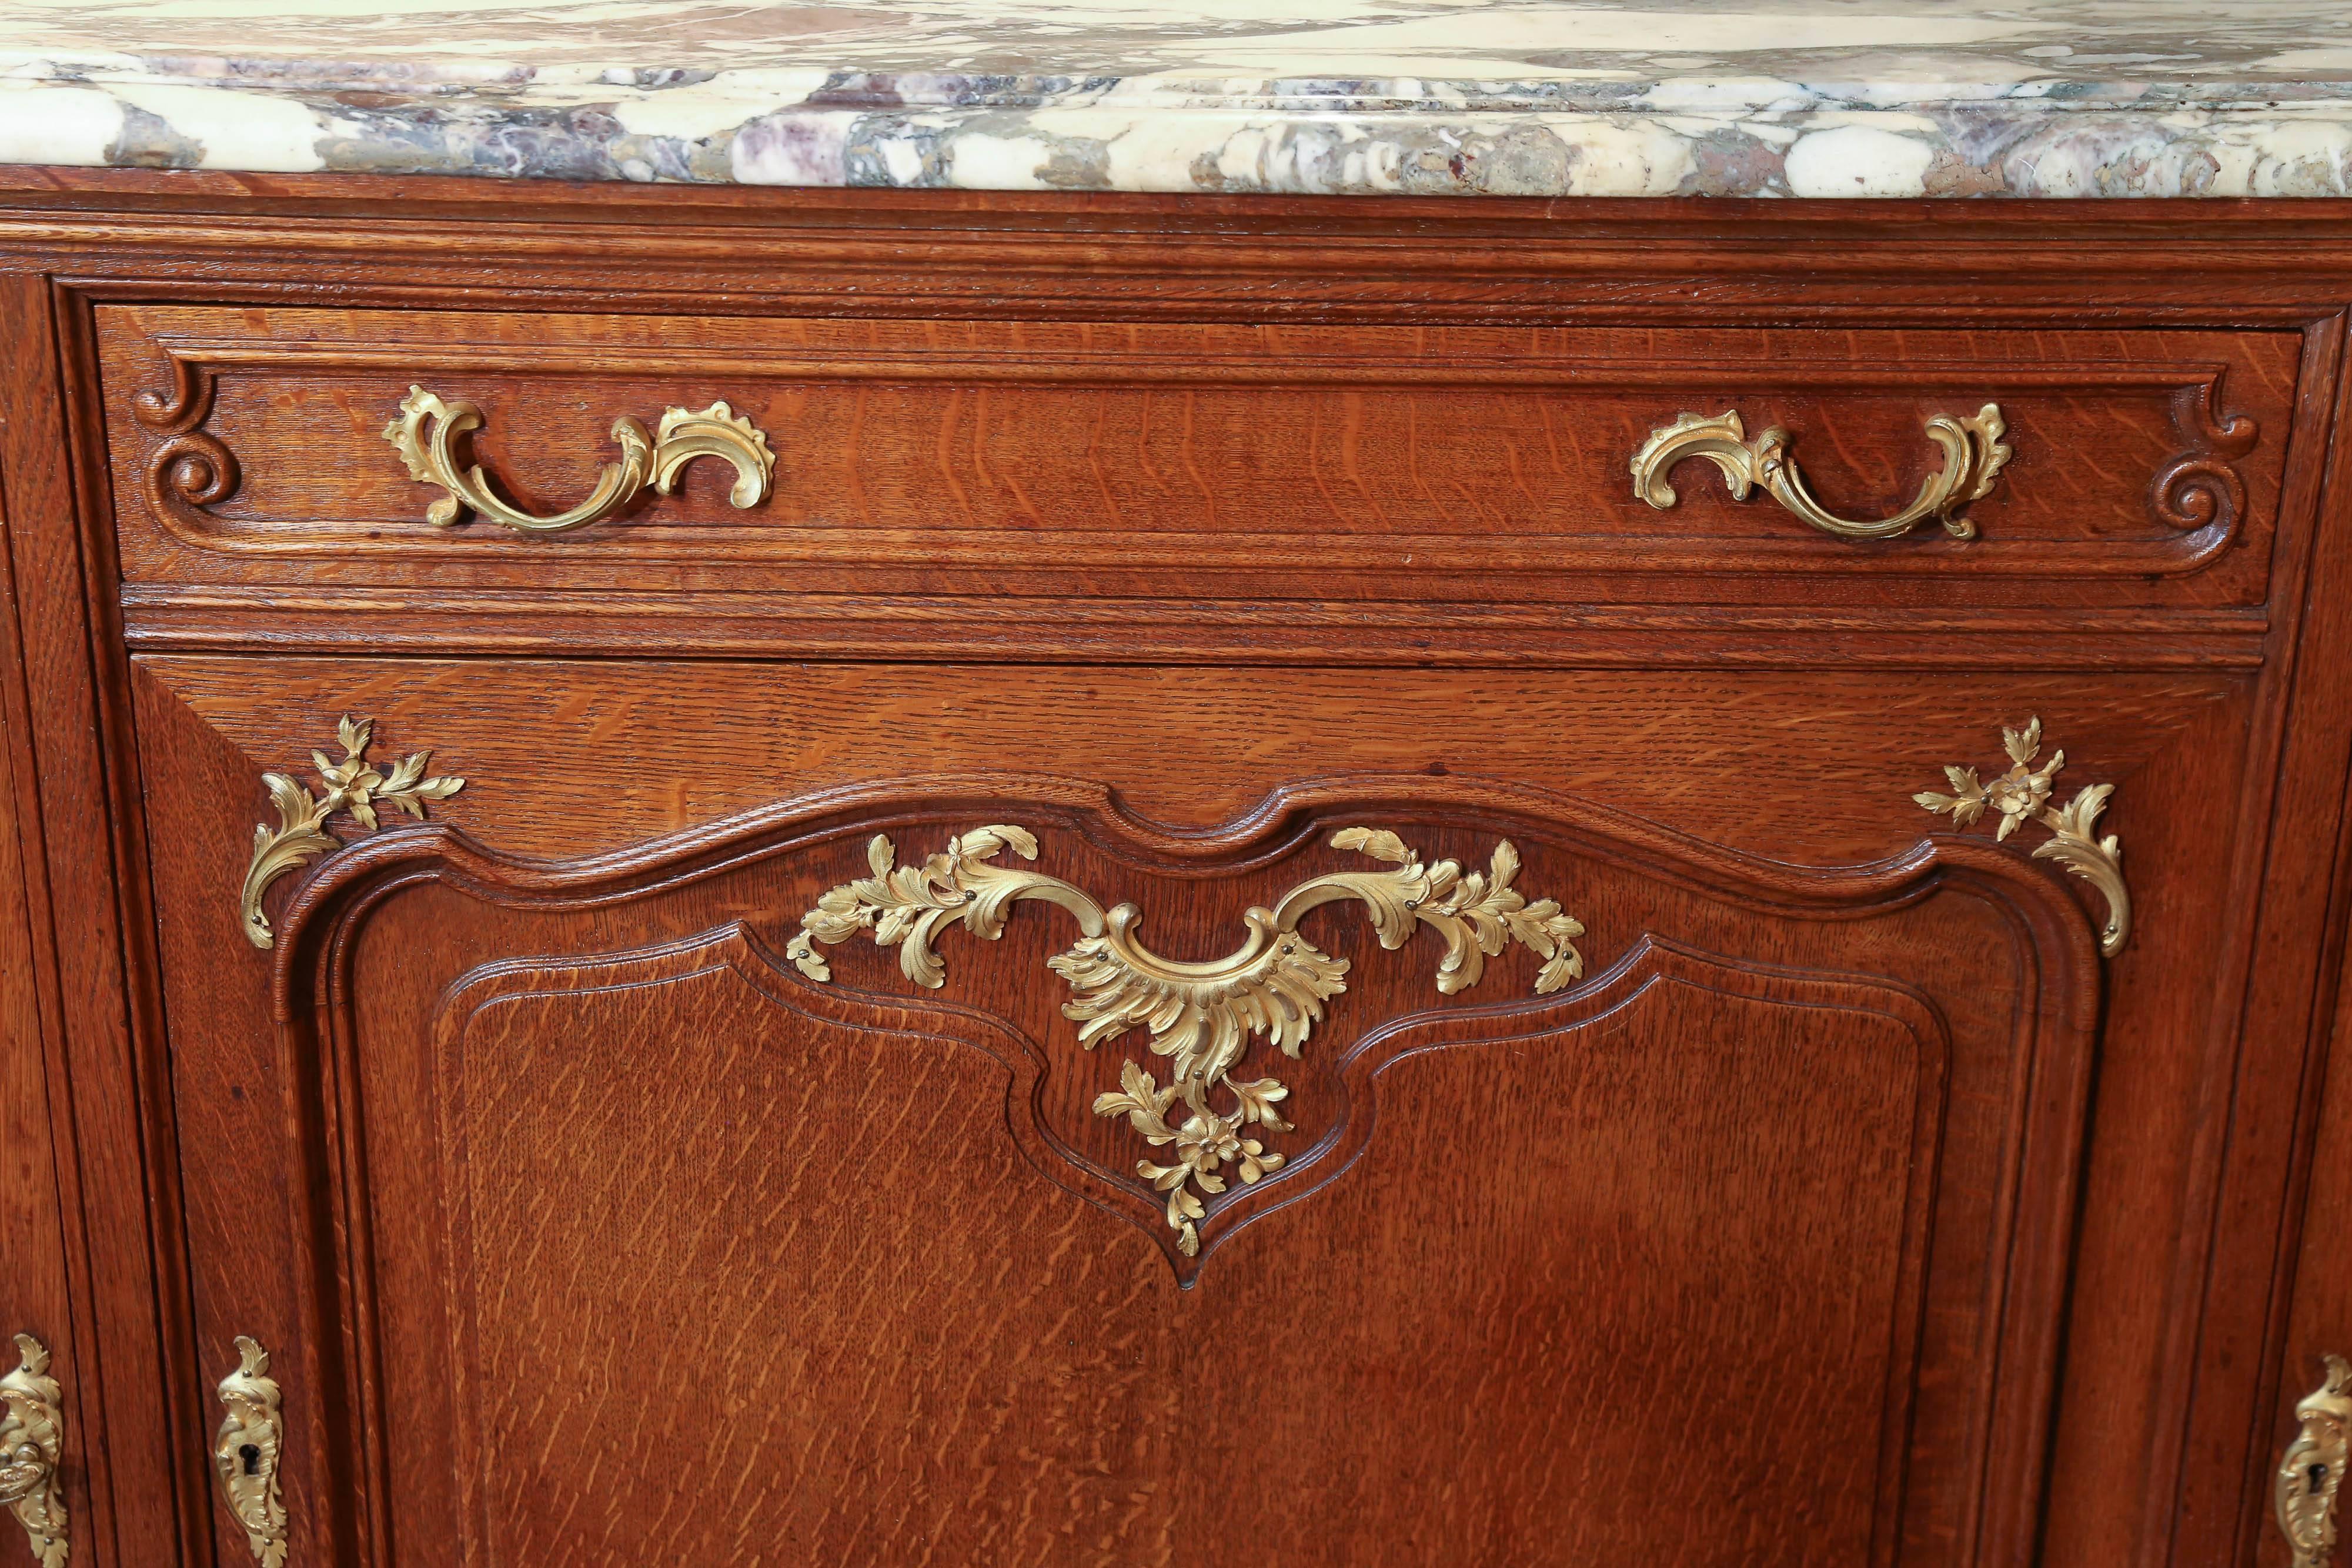 20th Century French Server Signed Haentges, Paris Gilt Bronze-Mounted Oak and Marble